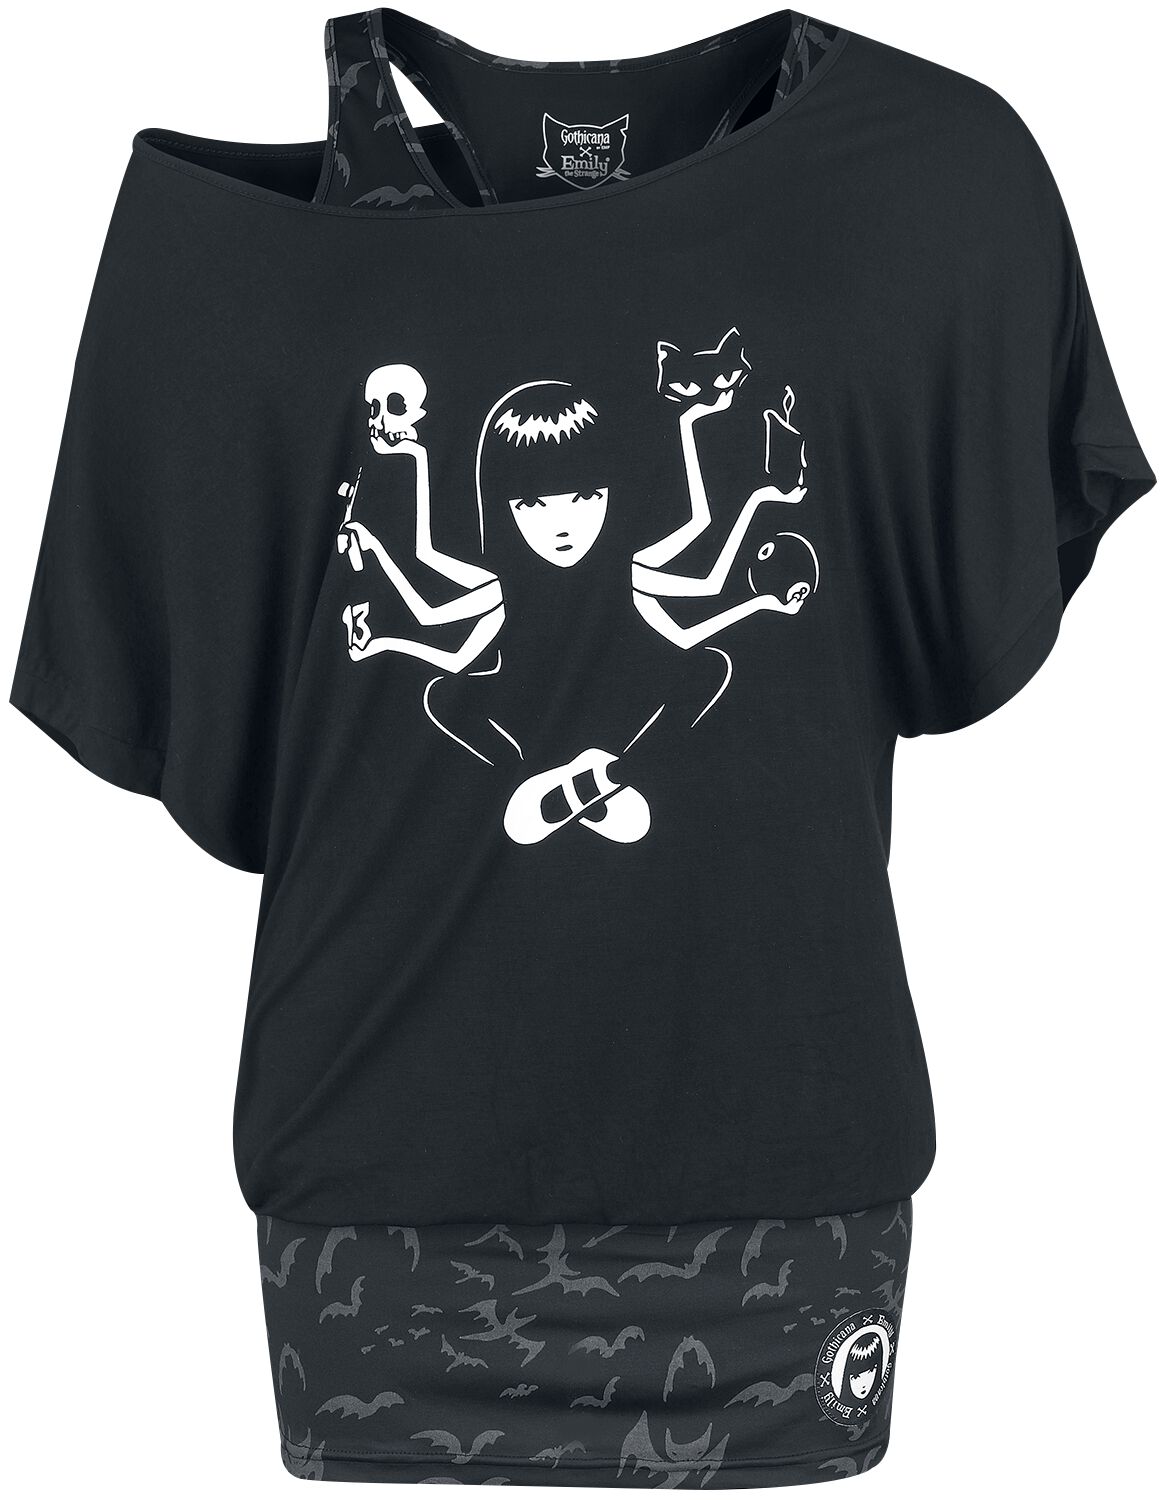 Image of T-Shirt Gothic di Gothicana by EMP - Gothicana X Emily the Strange 2-in-1 t-shirt and top - S a L - Donna - nero